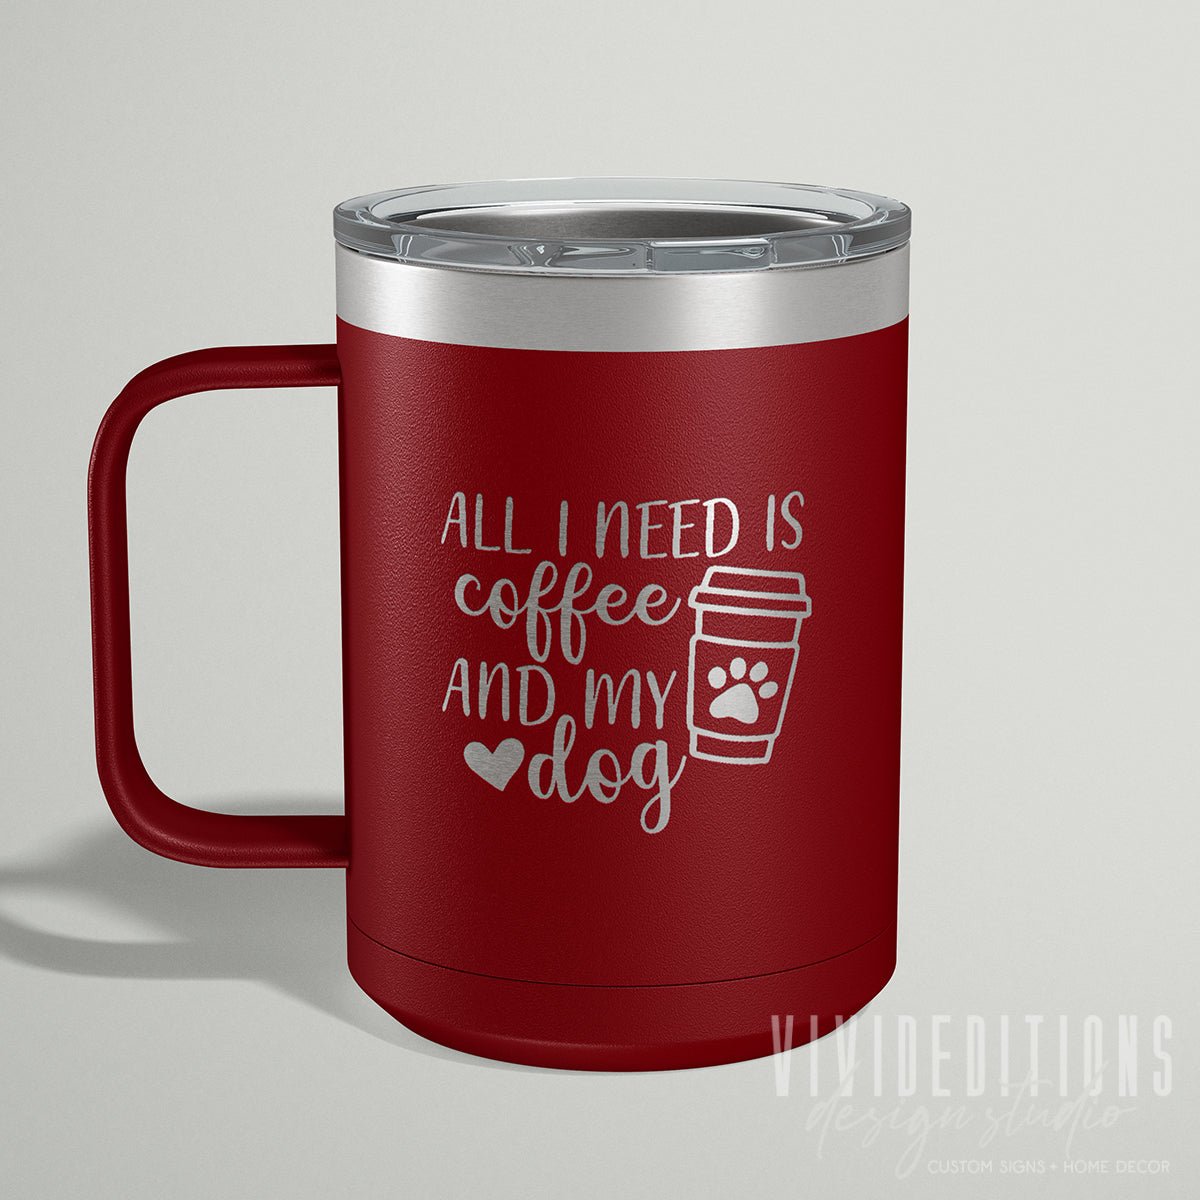 All I need is Coffee and my Dog Engraved Travel Coffee Mug with Slider Lid - 15oz (16 color options) Tumblers - VividEditions